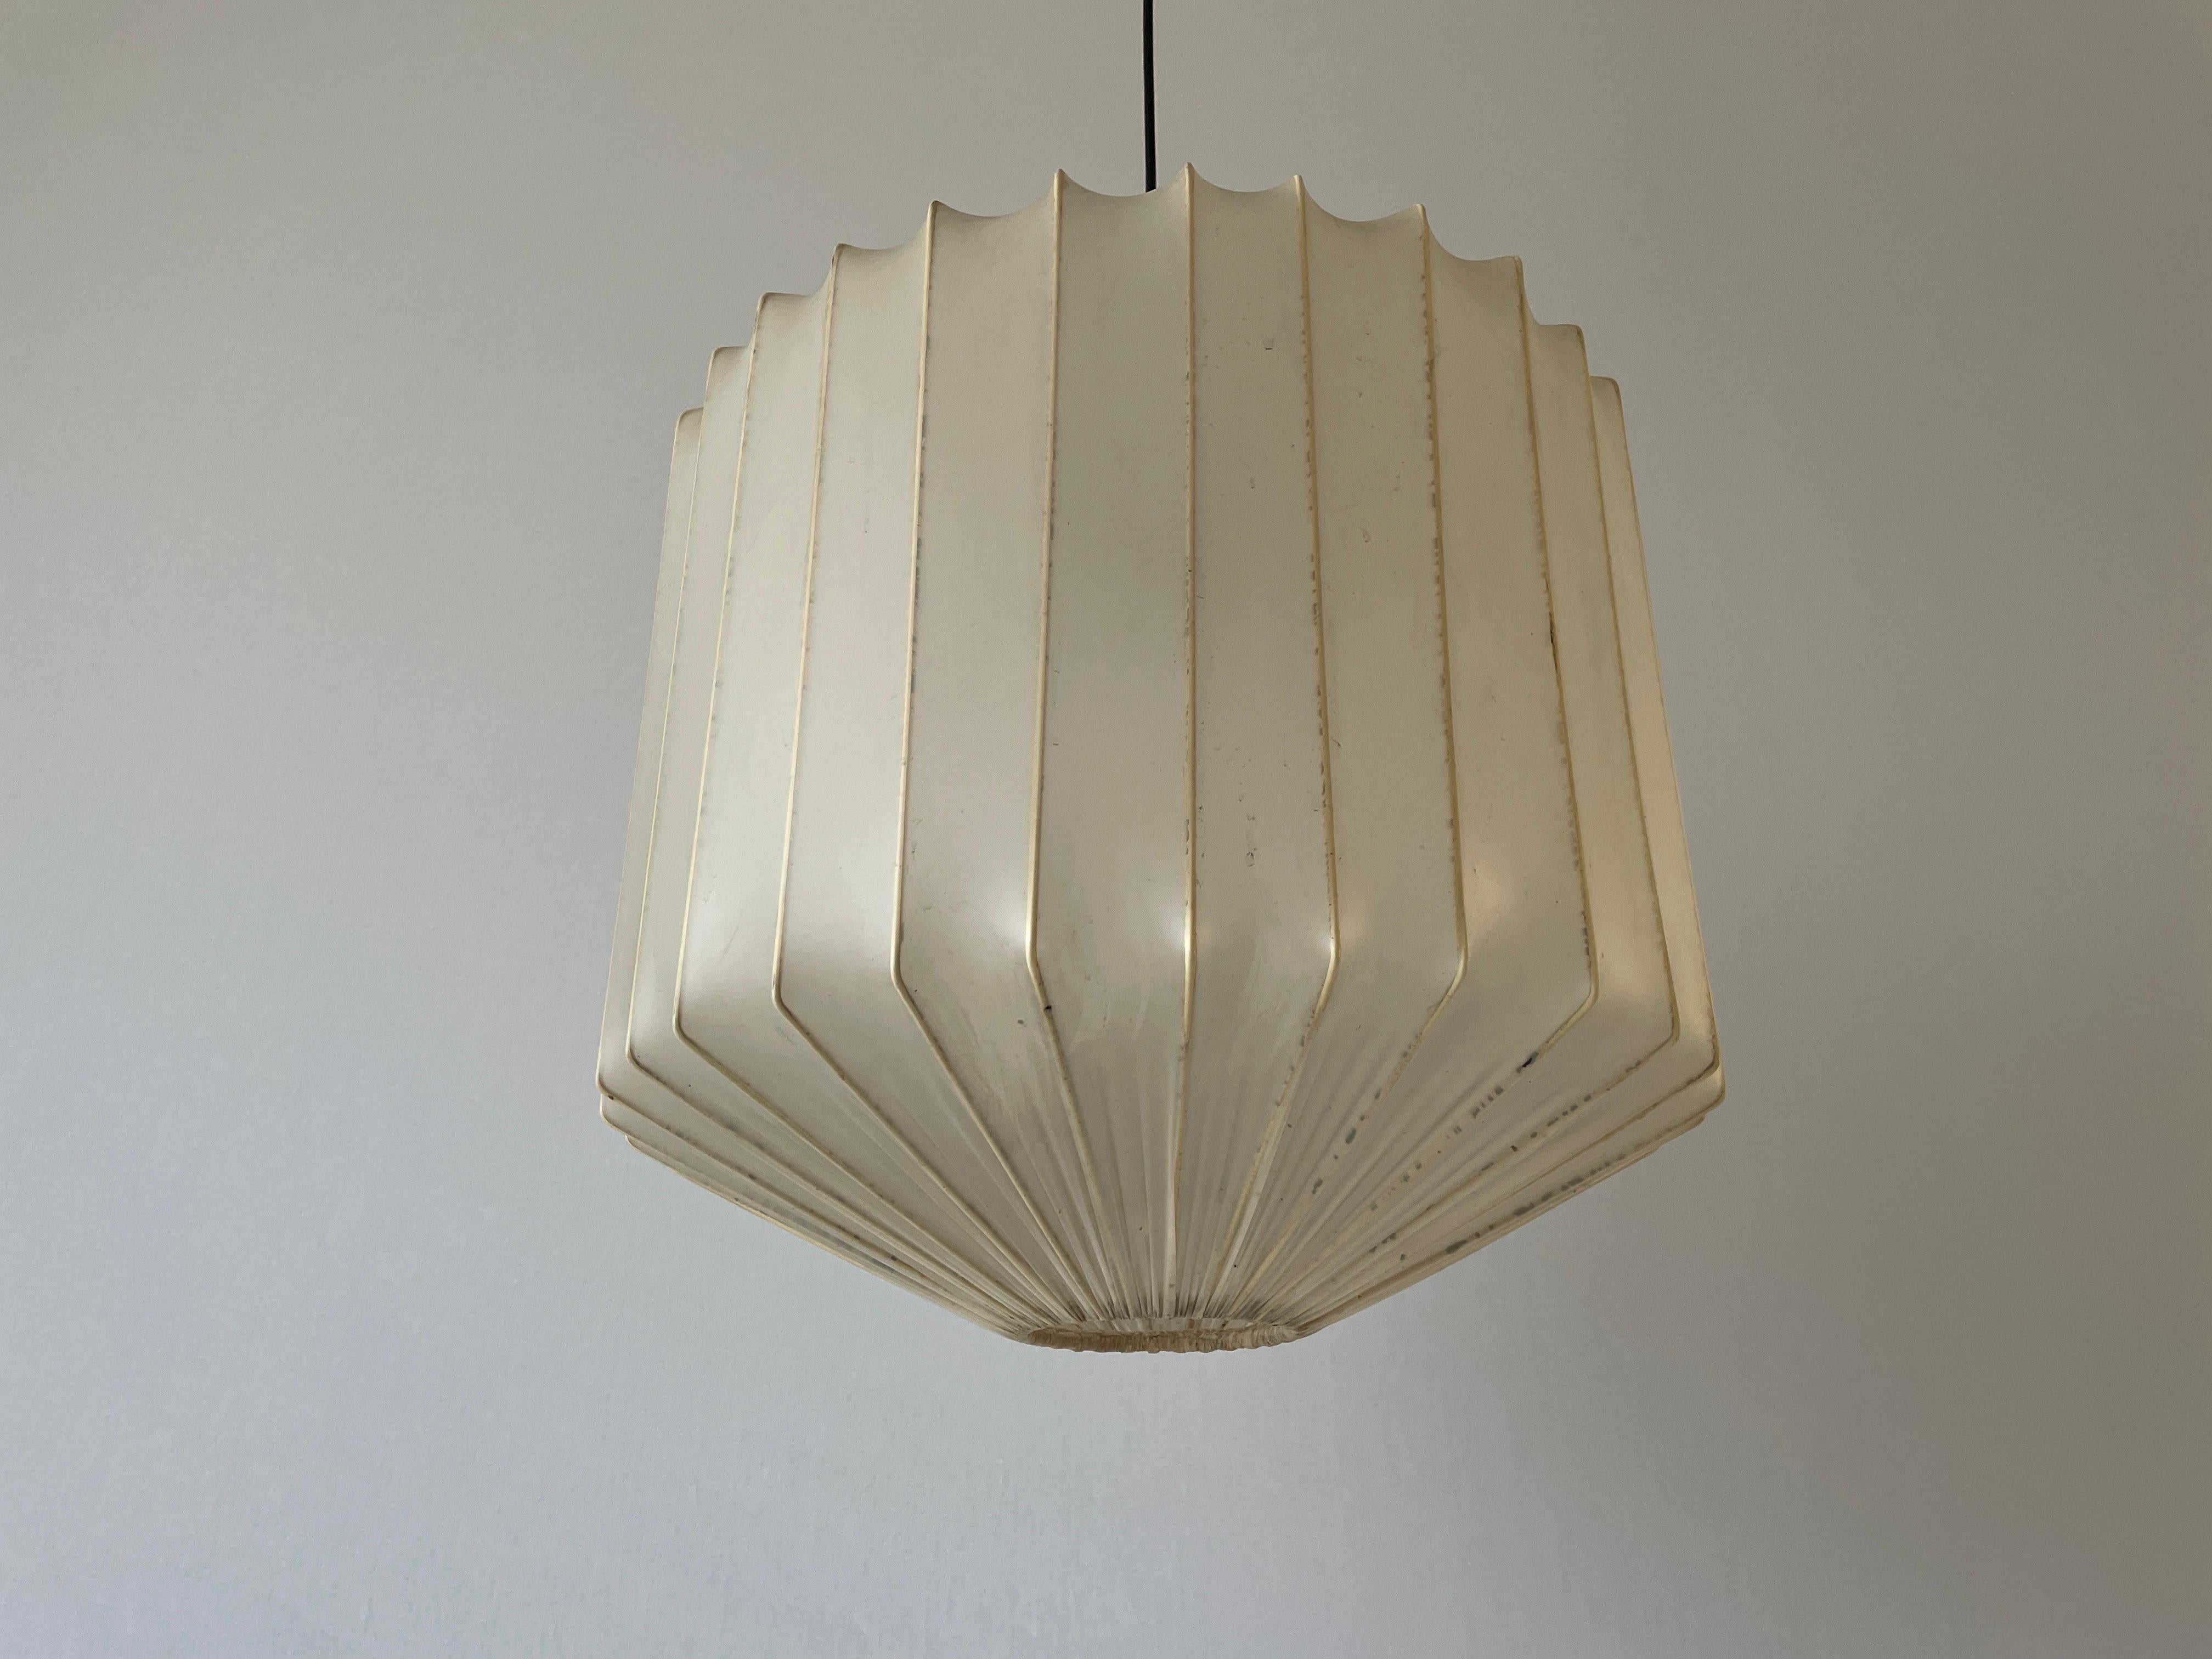 Satin Silk Fabric Ceiling Lamp in Cocoon Shape, 1960s, Italy

Lampshade is in very good vintage condition.

This lamp works with E27 light bulb 
Wired and suitable to use with 220V and 110V for all countries.

Measurements:
Height: 105 cm (can be